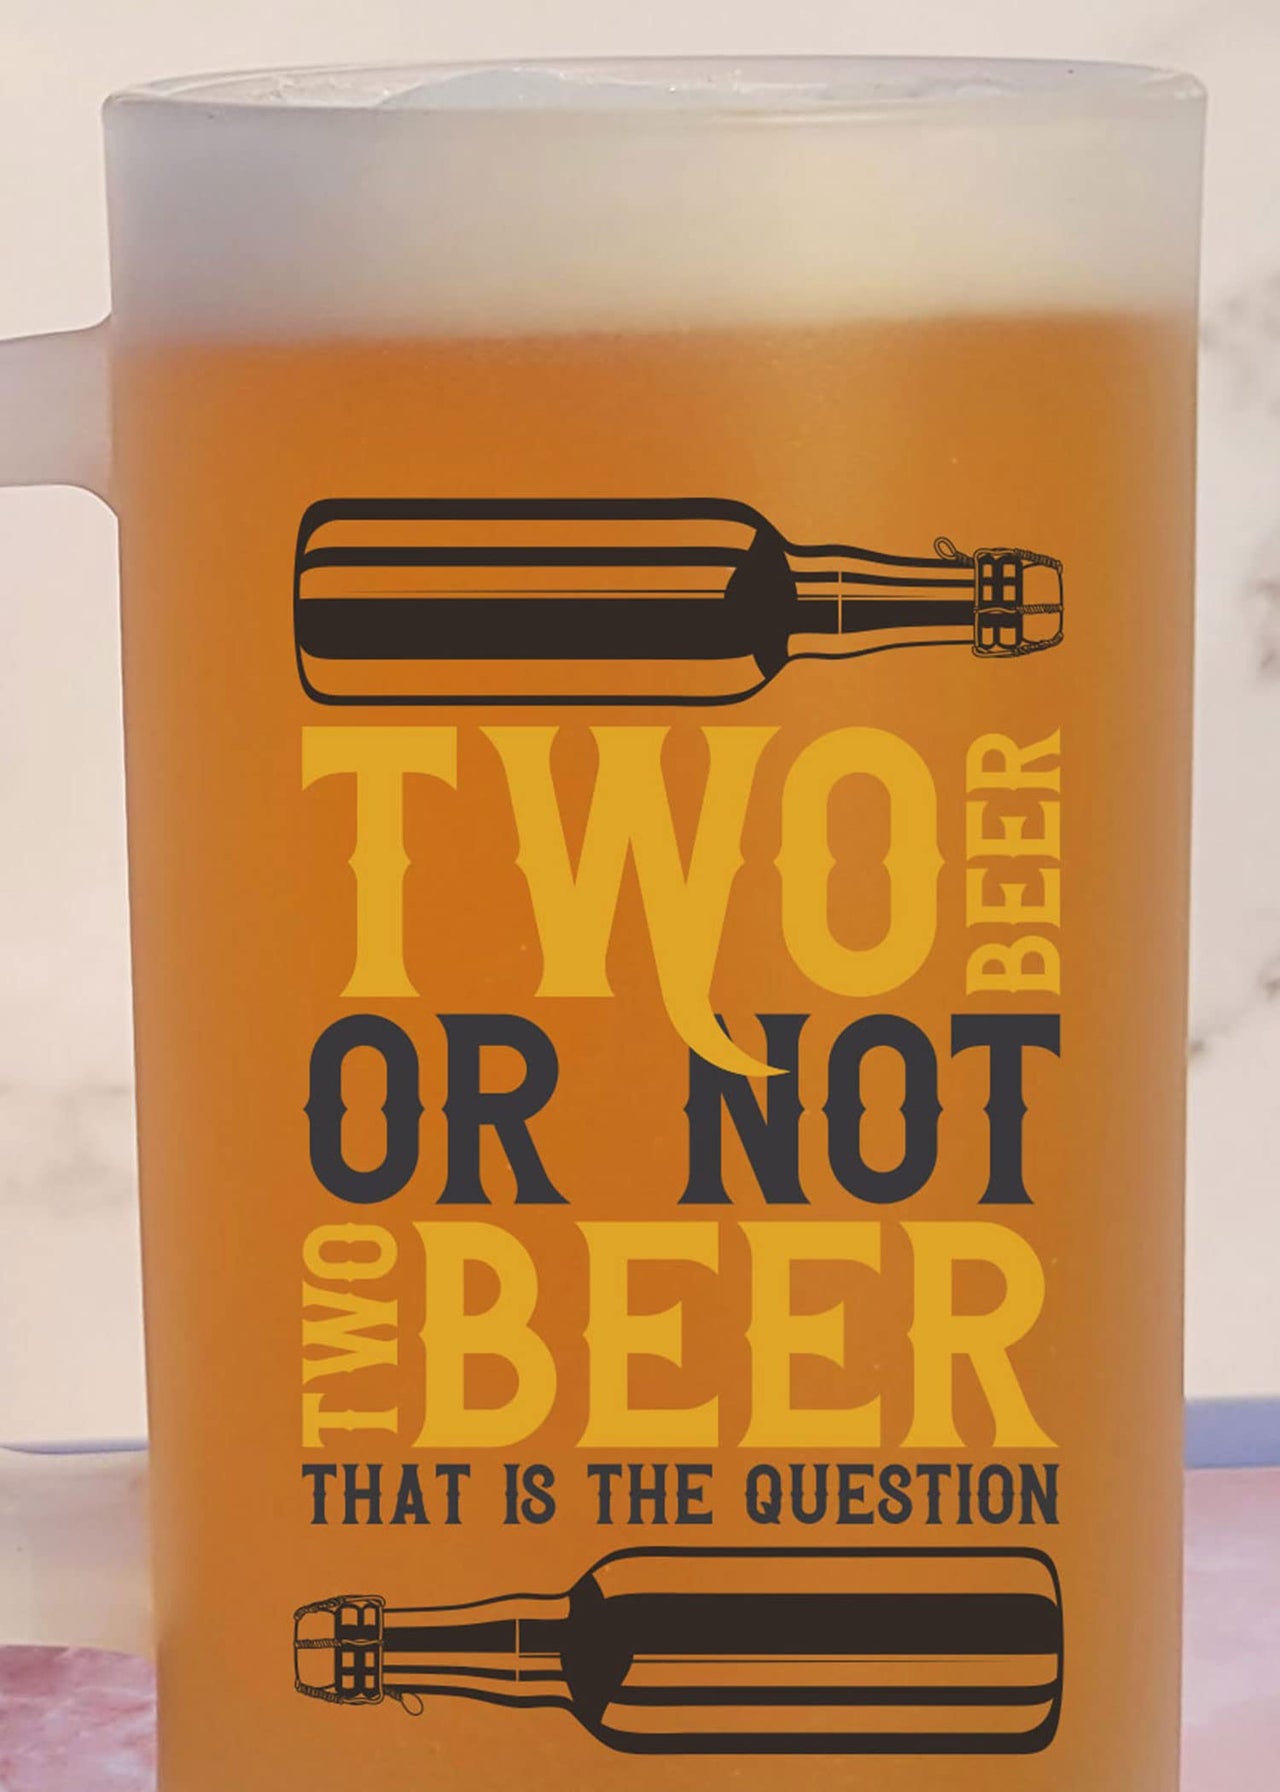 Two Beer Or Not Two Beer - Frosted Beer Mug